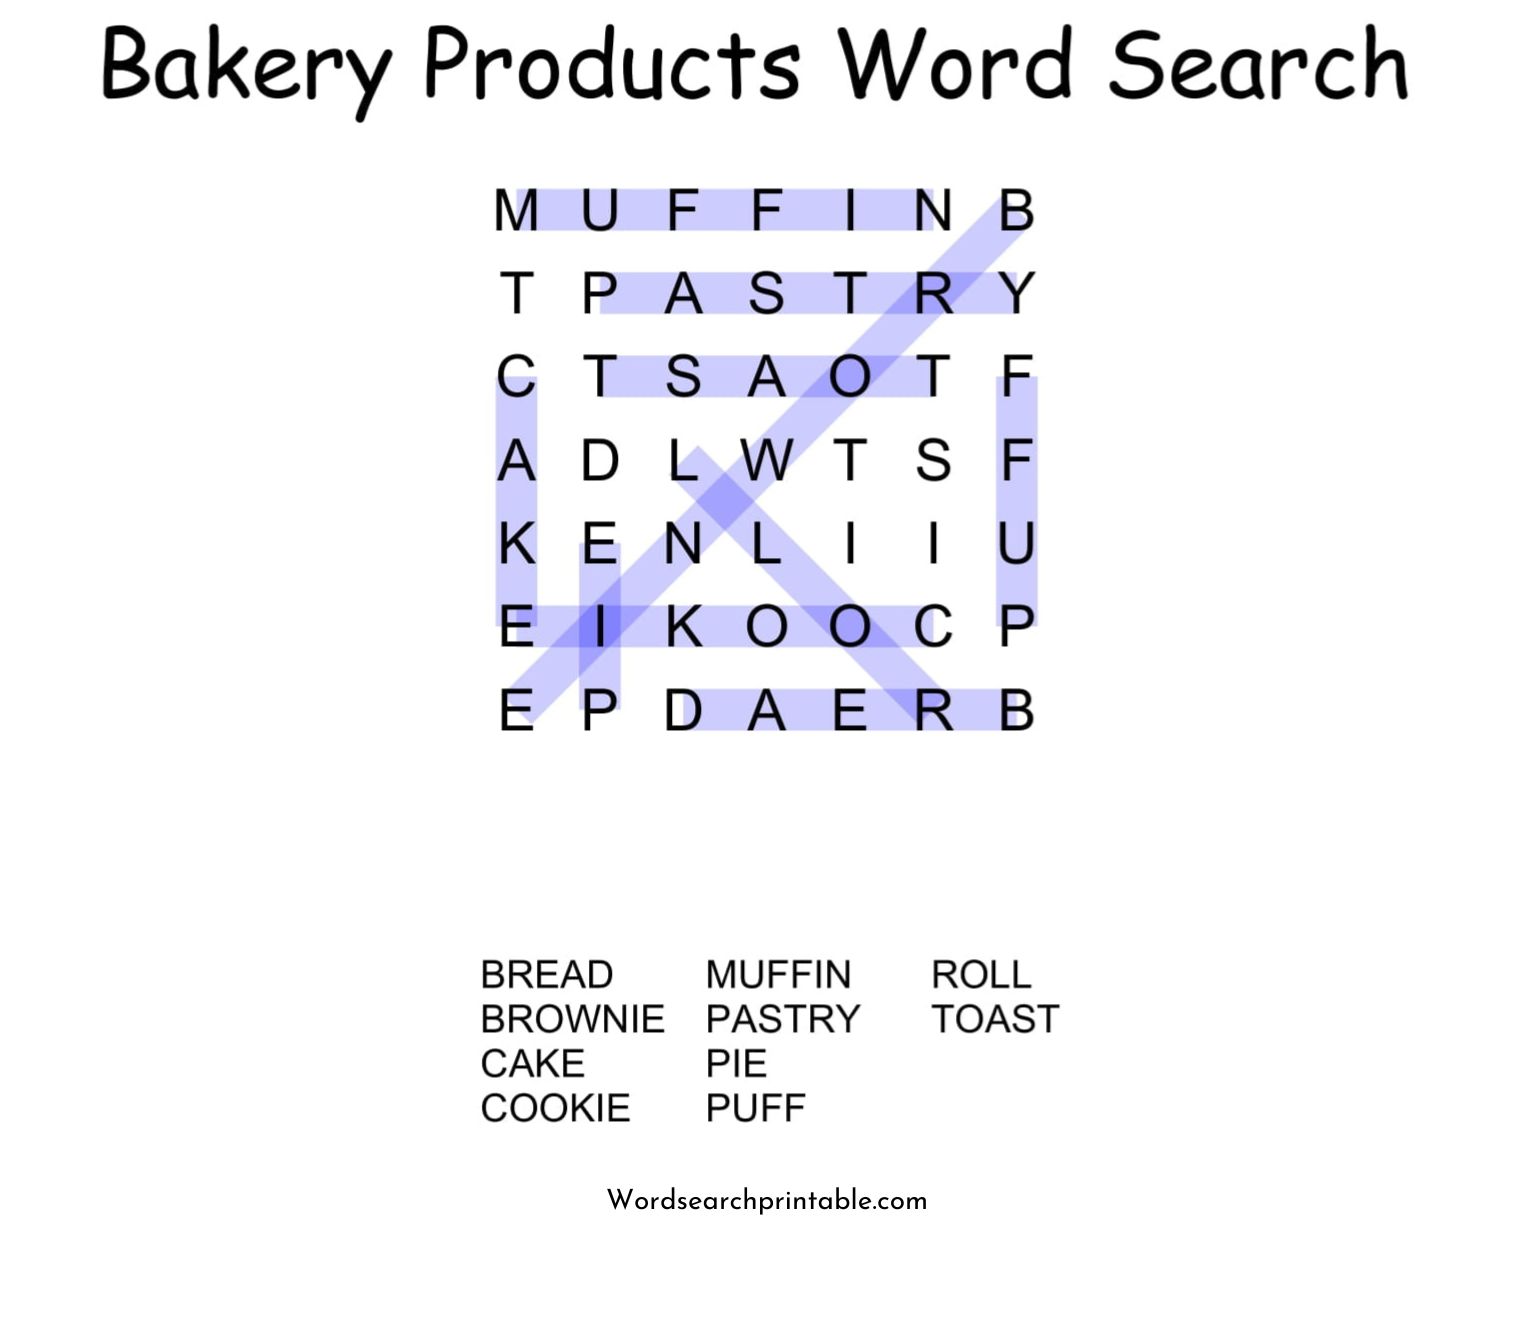 bakery products word search puzzle solution